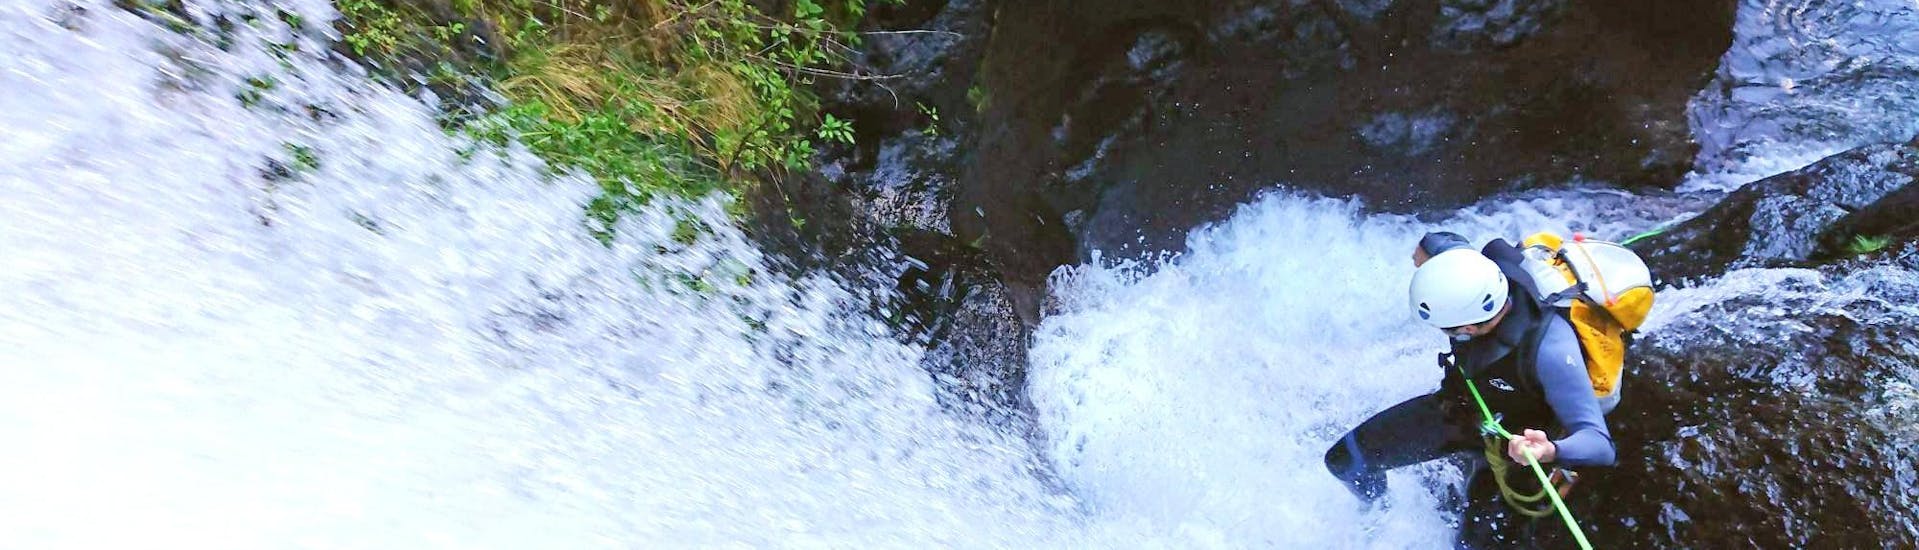 During the Canyoning "Intermediate" - Madeira with Epic Madeira, a participant is bravely roping down over a thunderous waterfall.